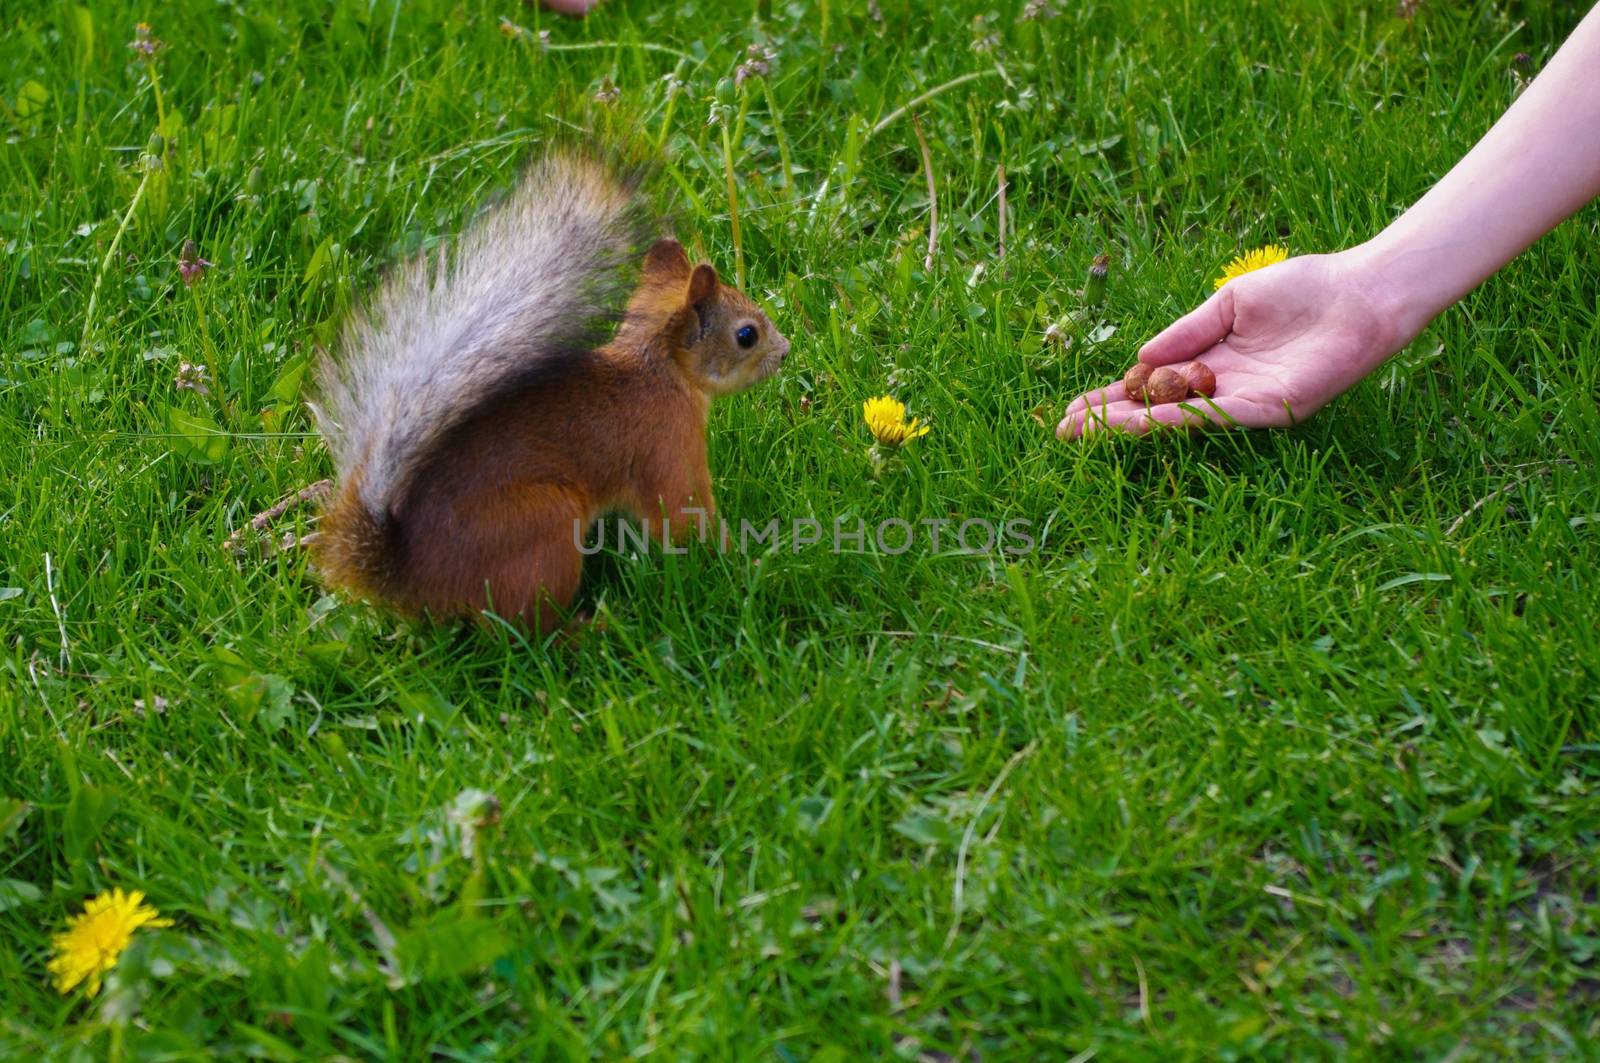 Squirrel feeding from the hand on a green medow by evolutionnow